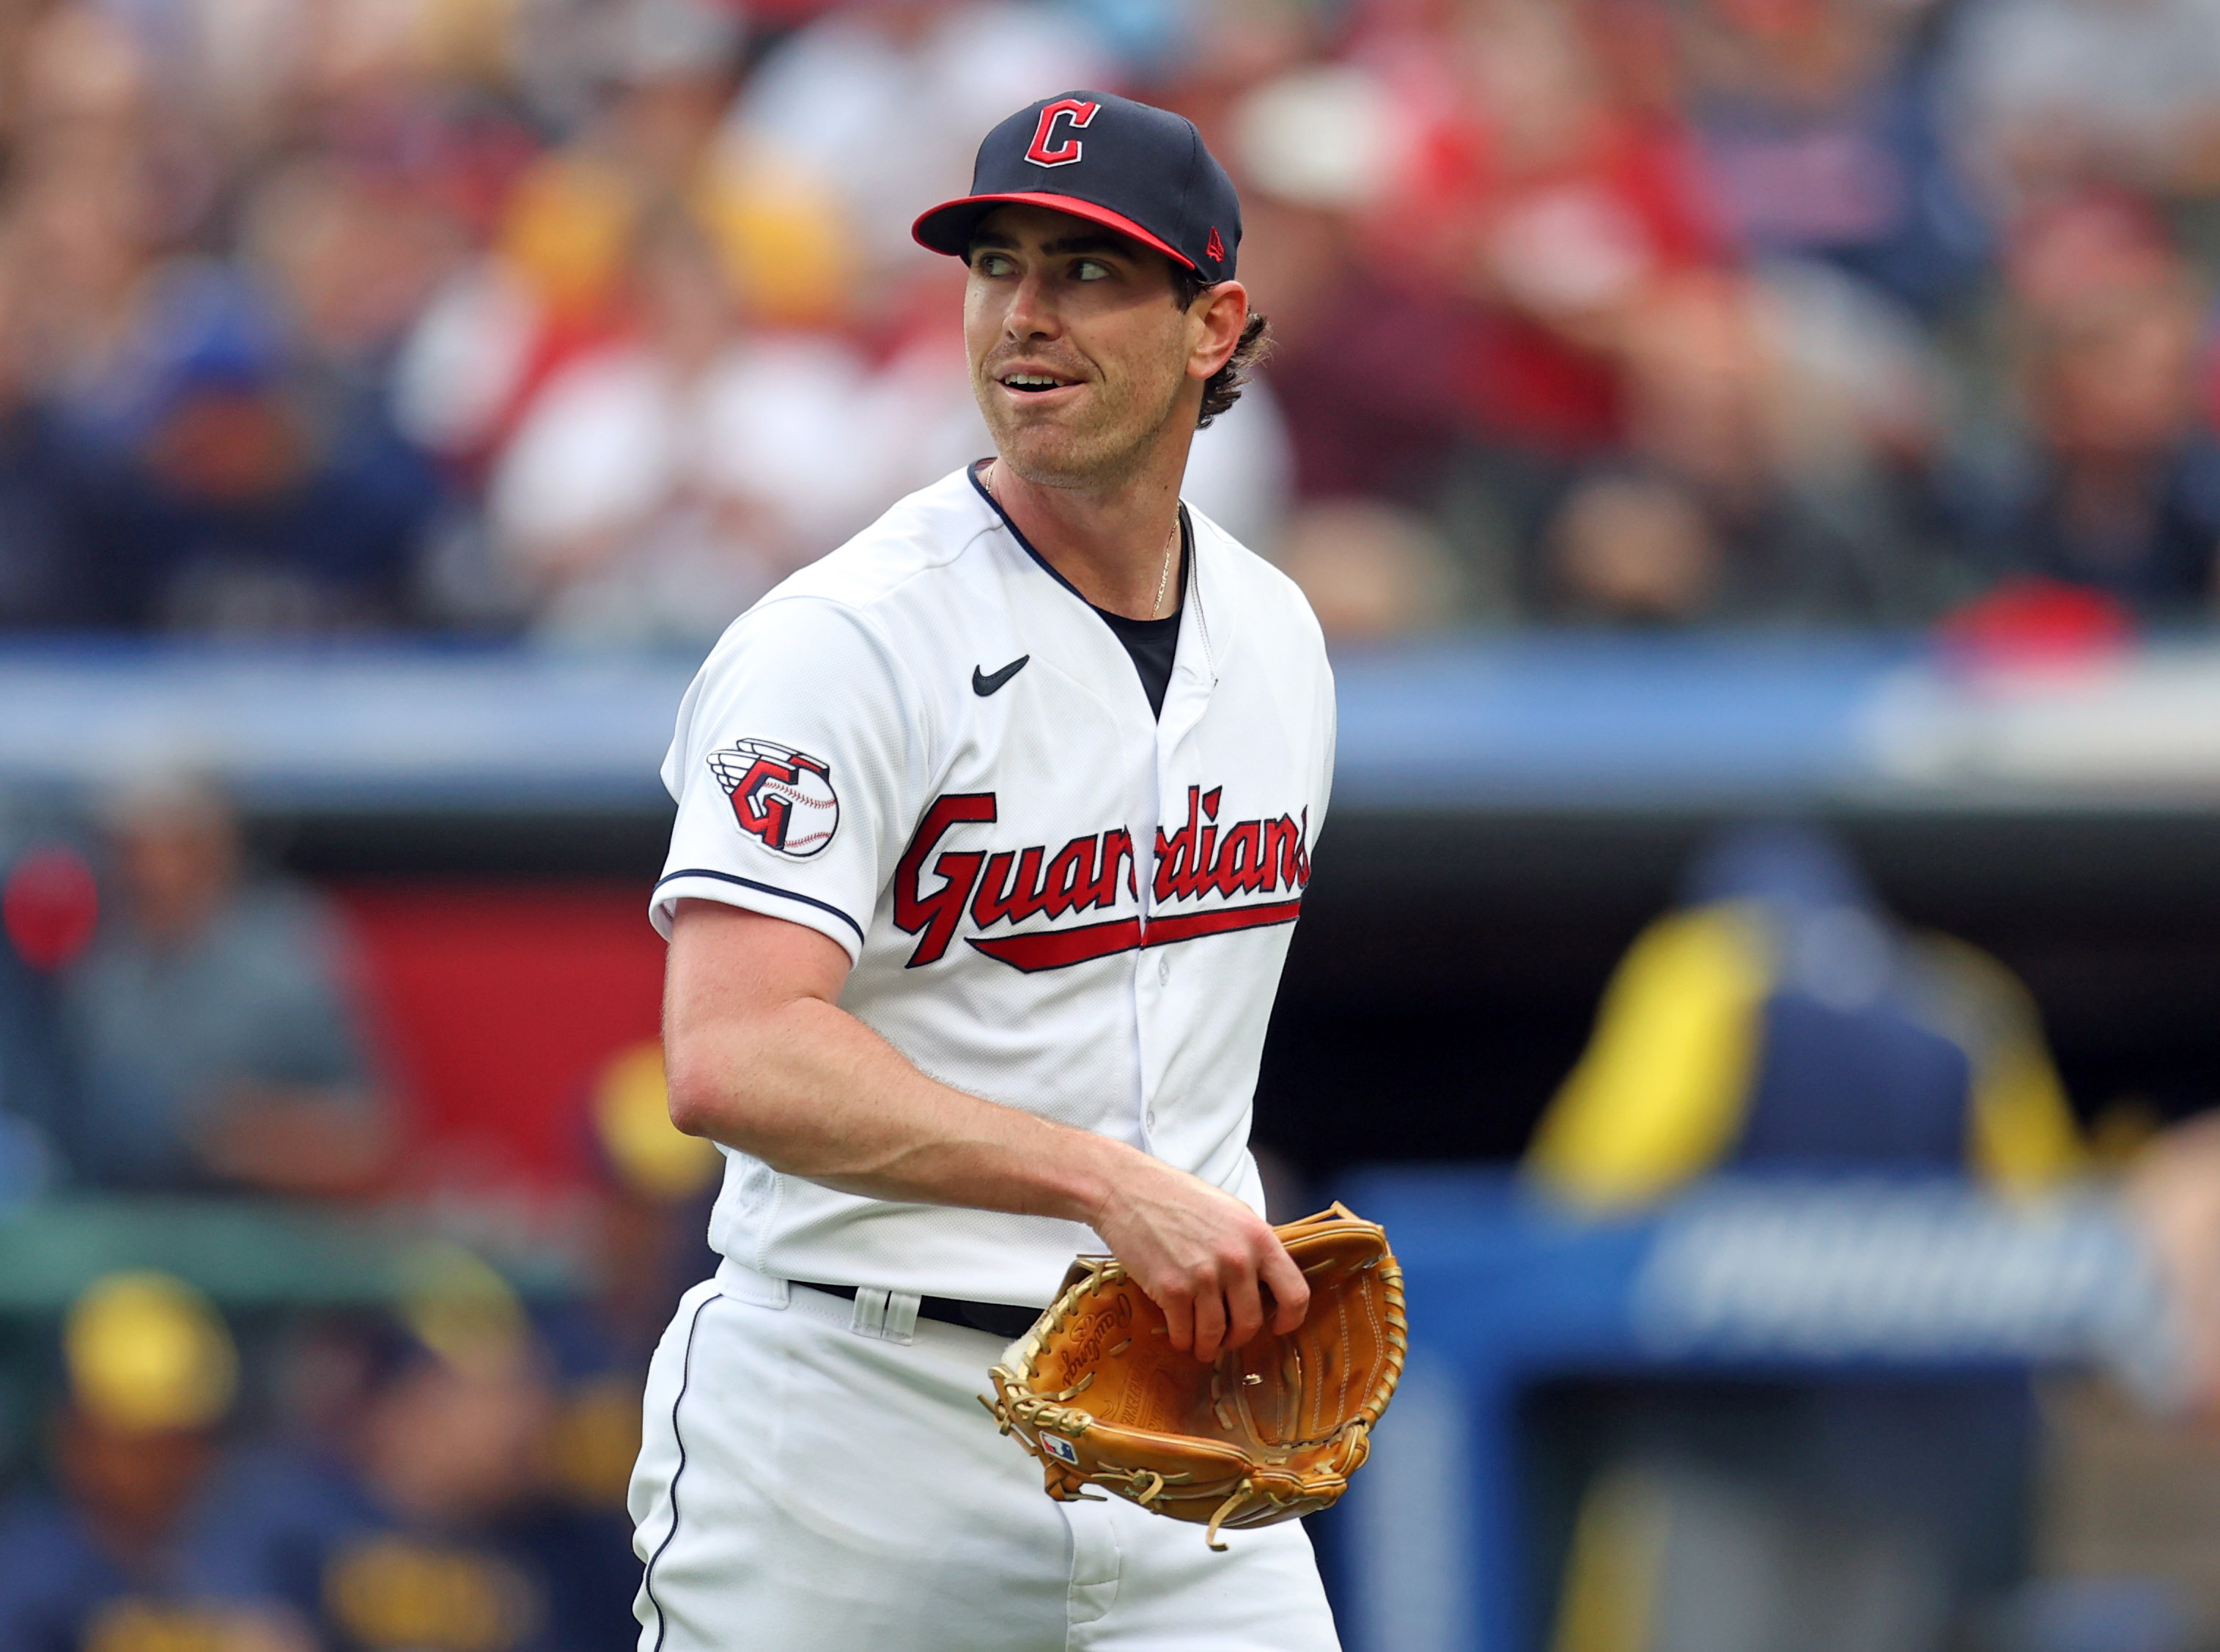 Guardians' ace Shane Bieber open to long-term deal with club